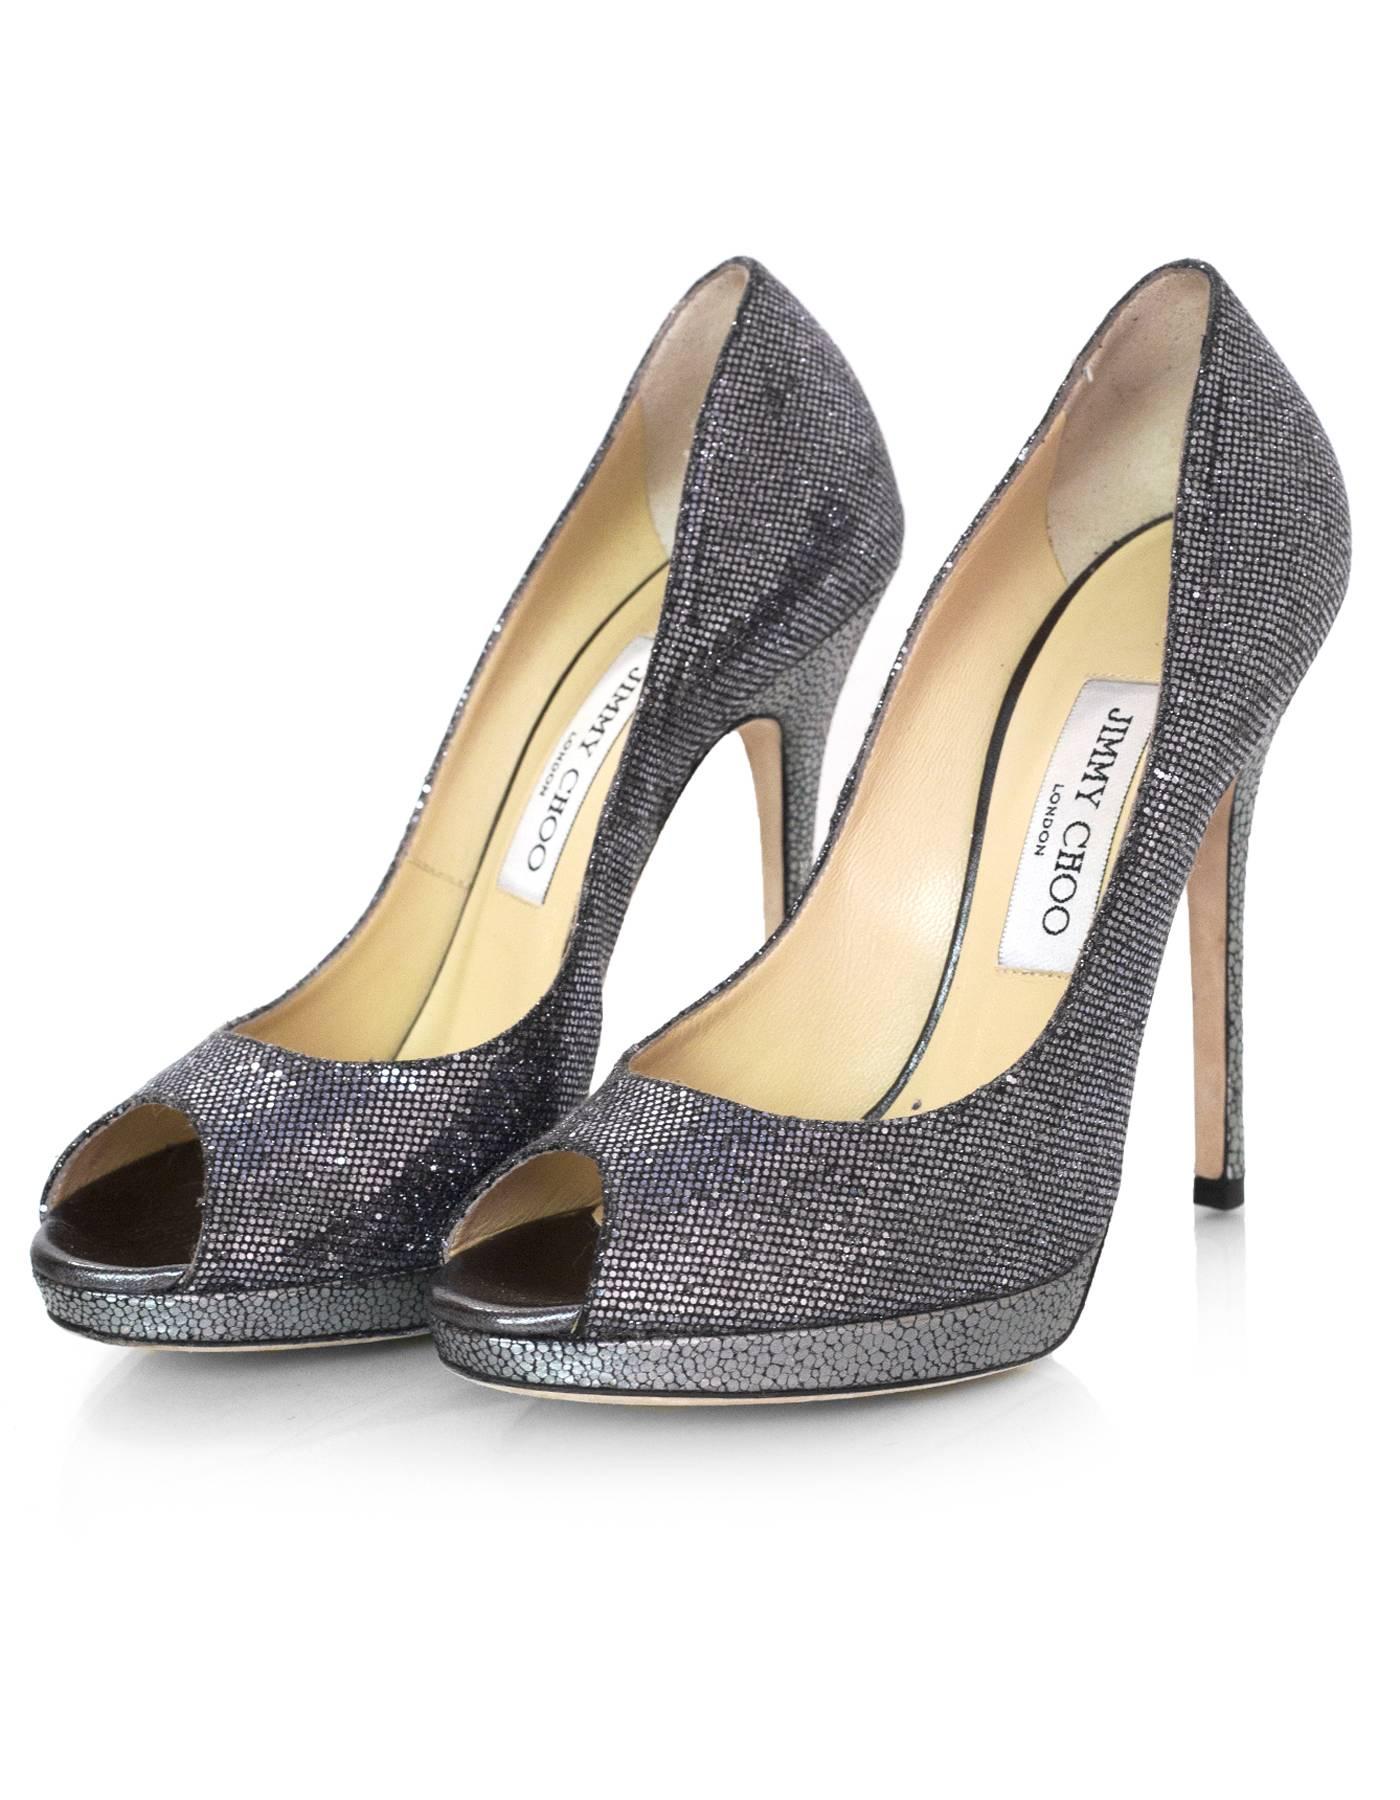 Jimmy Choo Silver Glitter Platform Peep Toe Pumps sz 37.5

Made In: Italy
Color: Silver
Materials: Glitter mesh
Closure/Opening: Slip on
Sole Stamp: Jimmy Choo London Made in Italy 37 1/2
Overall Condition: Excellent pre-owned condition with the